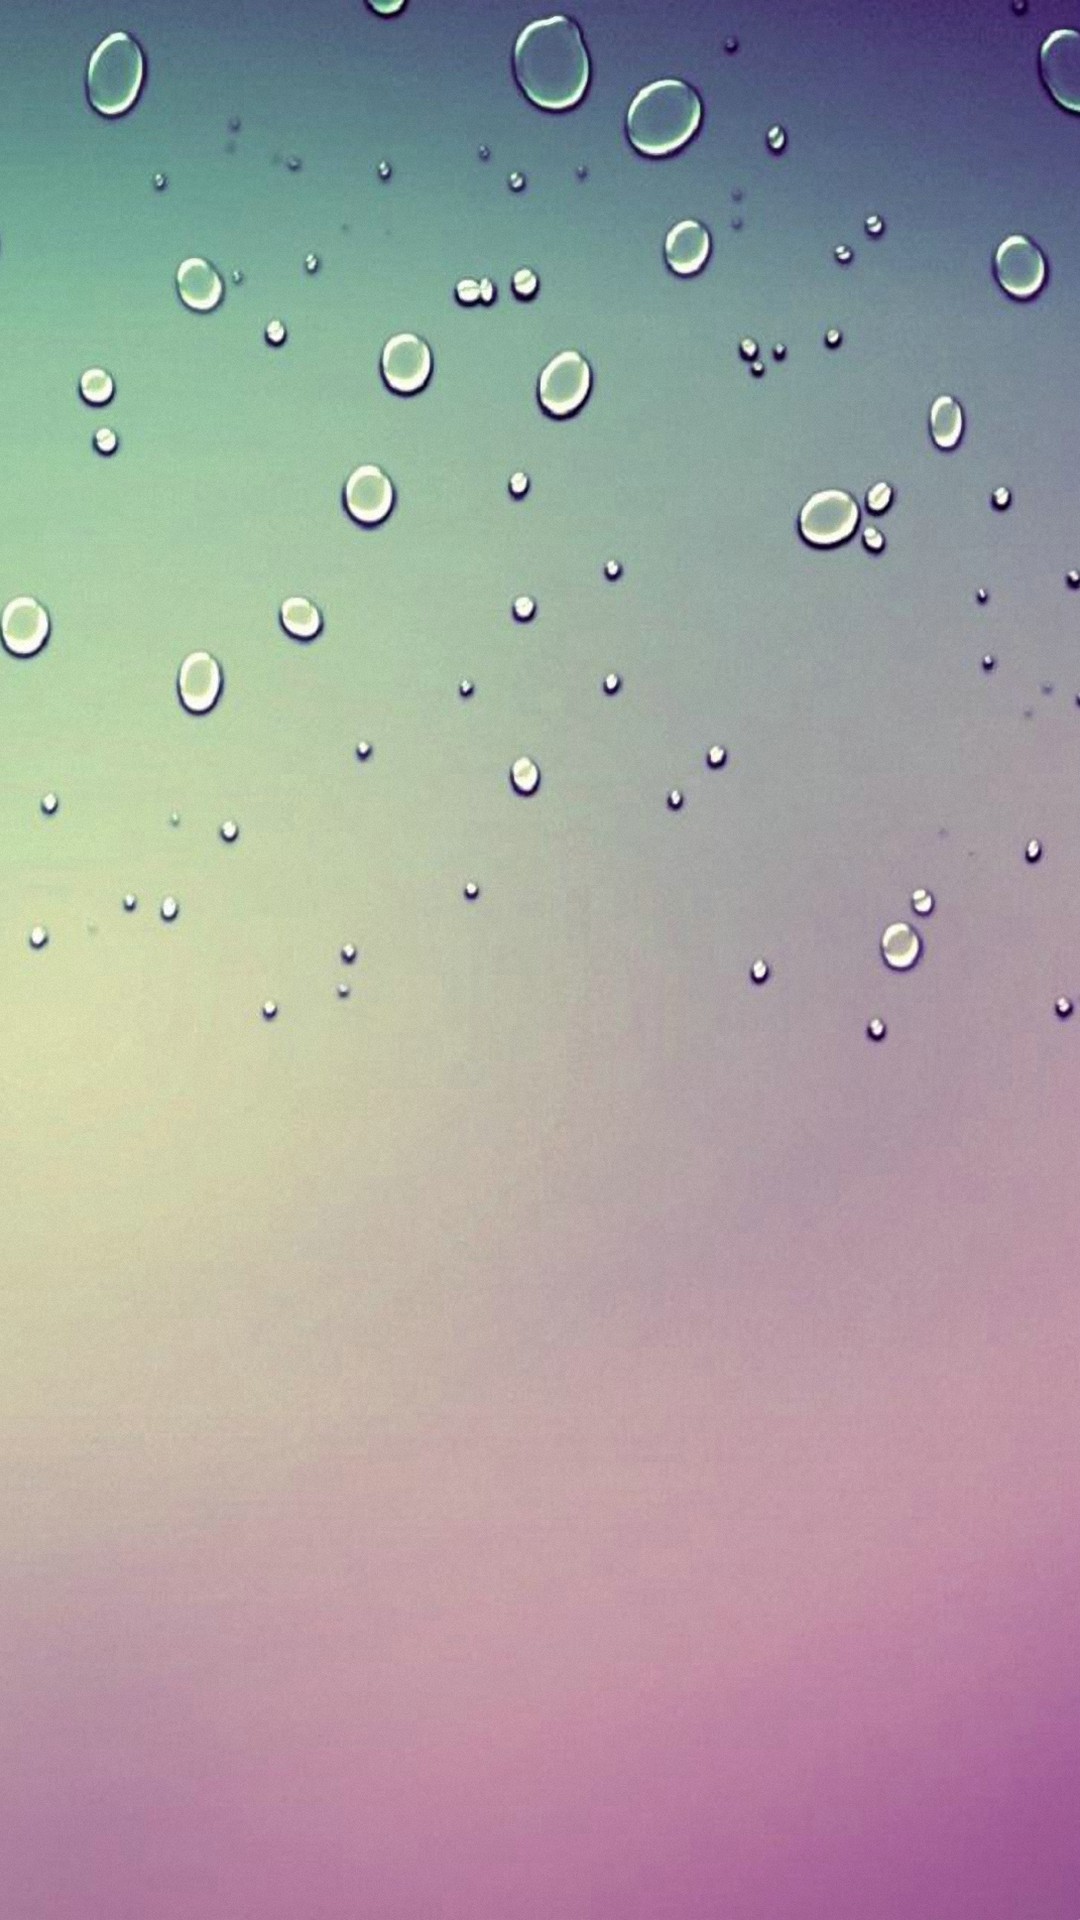 Rain Wallpaper Android with HD resolution 1080x1920